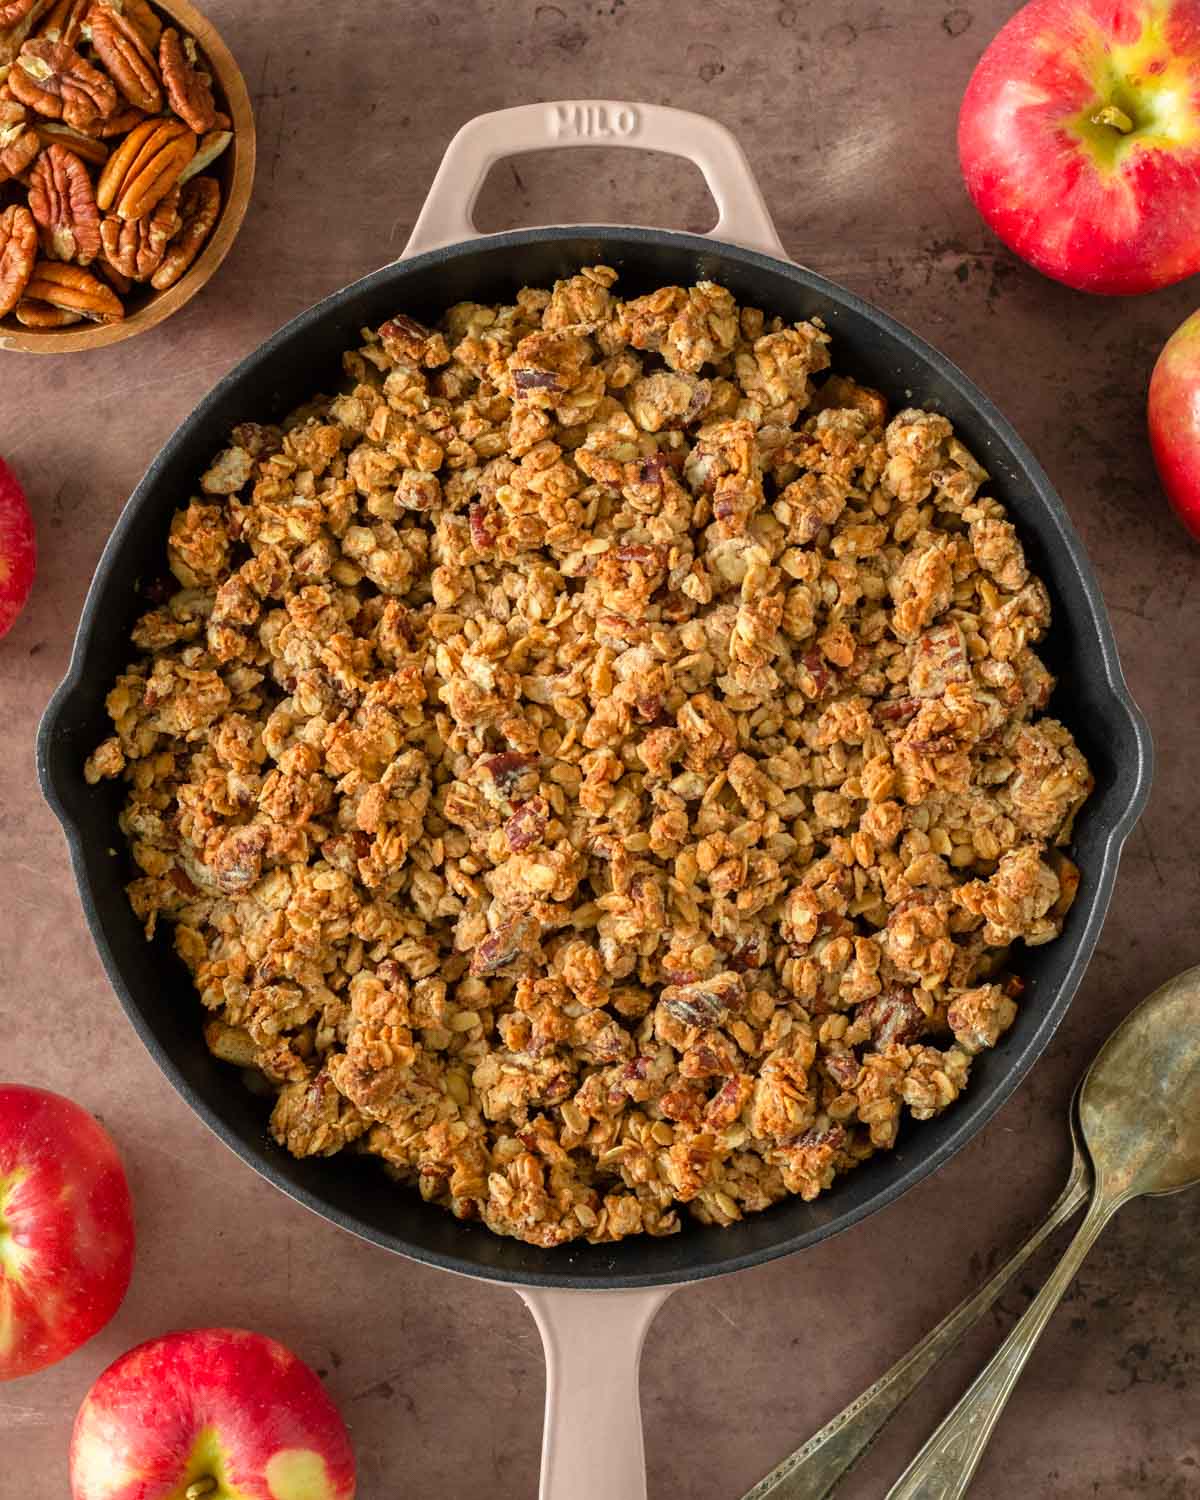 This skillet apple crisp is a classic fall dessert made with freshly picked apples tossed in maple syrup and cinnamon and baked in a skillet with a flavorful crisp topping.